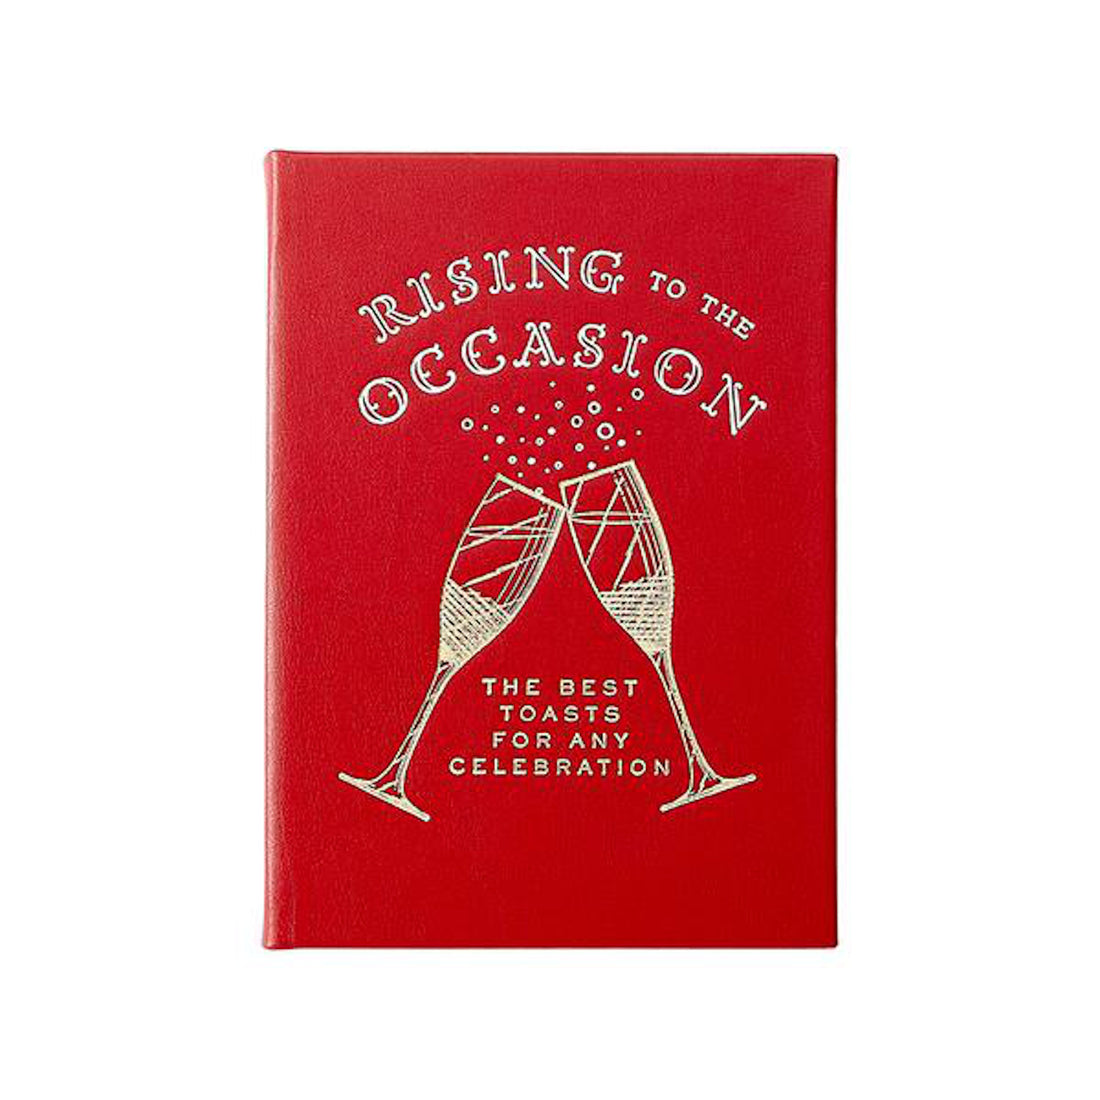 Red Rising to the Occasion bonded leather book cover by Graphic Image titled &quot;rising to the occasion - the best celebration toasts for any celebration&quot; with an illustration of two clinking champagne glasses.